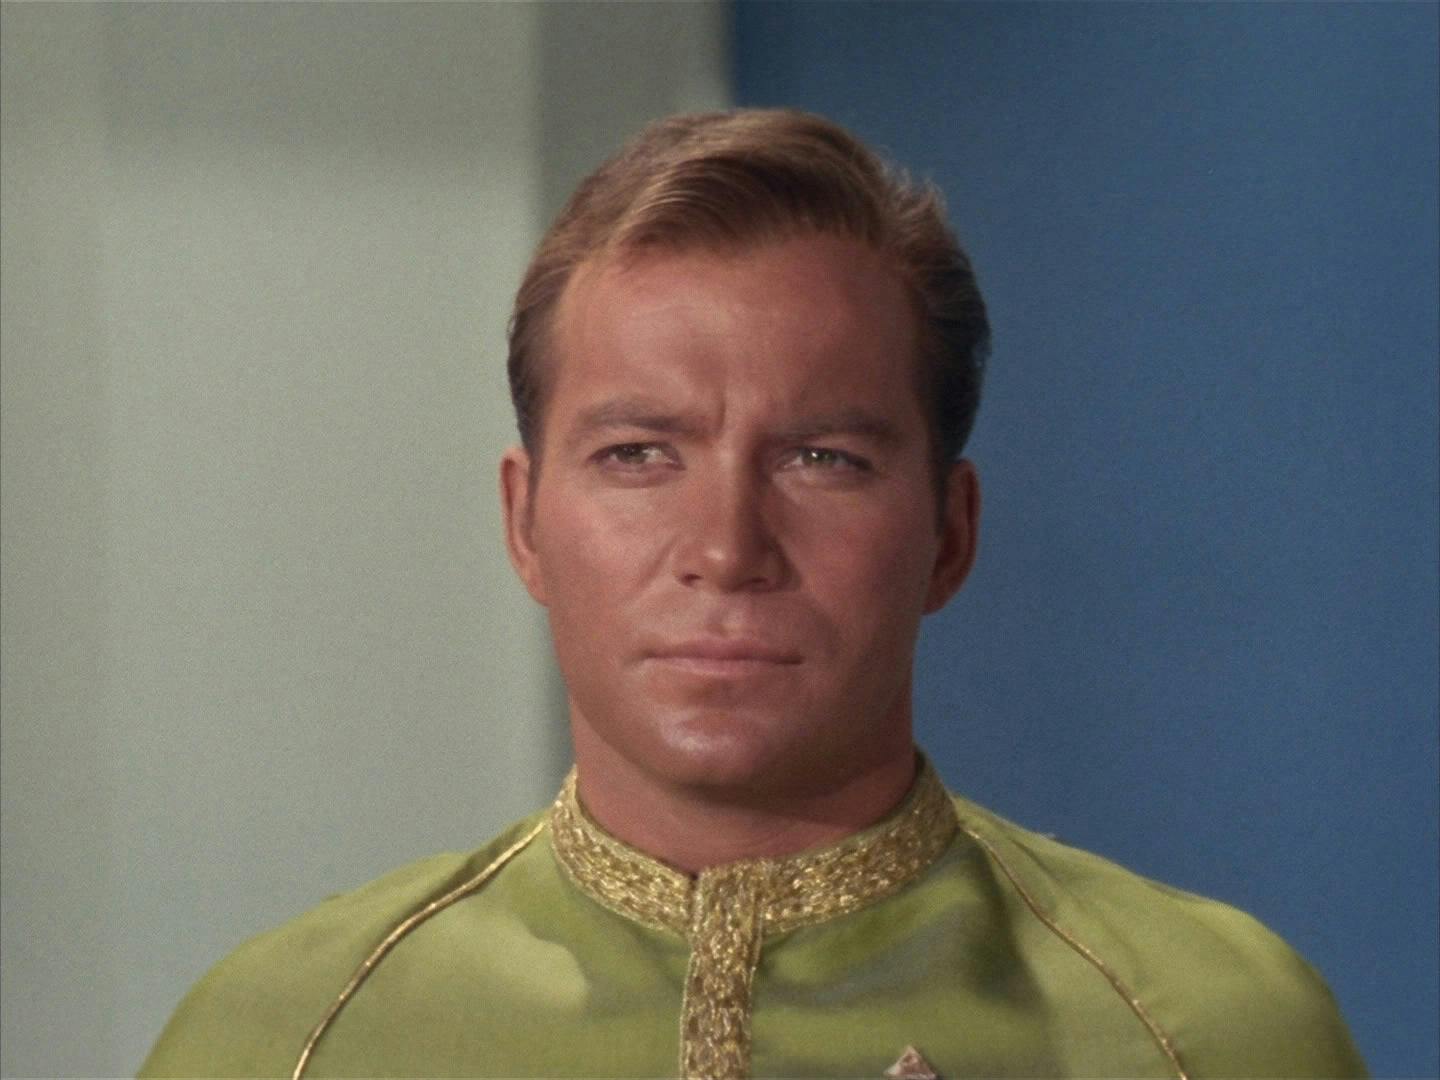 Captain Kirk, wearing his dress uniform, stands at attention. 